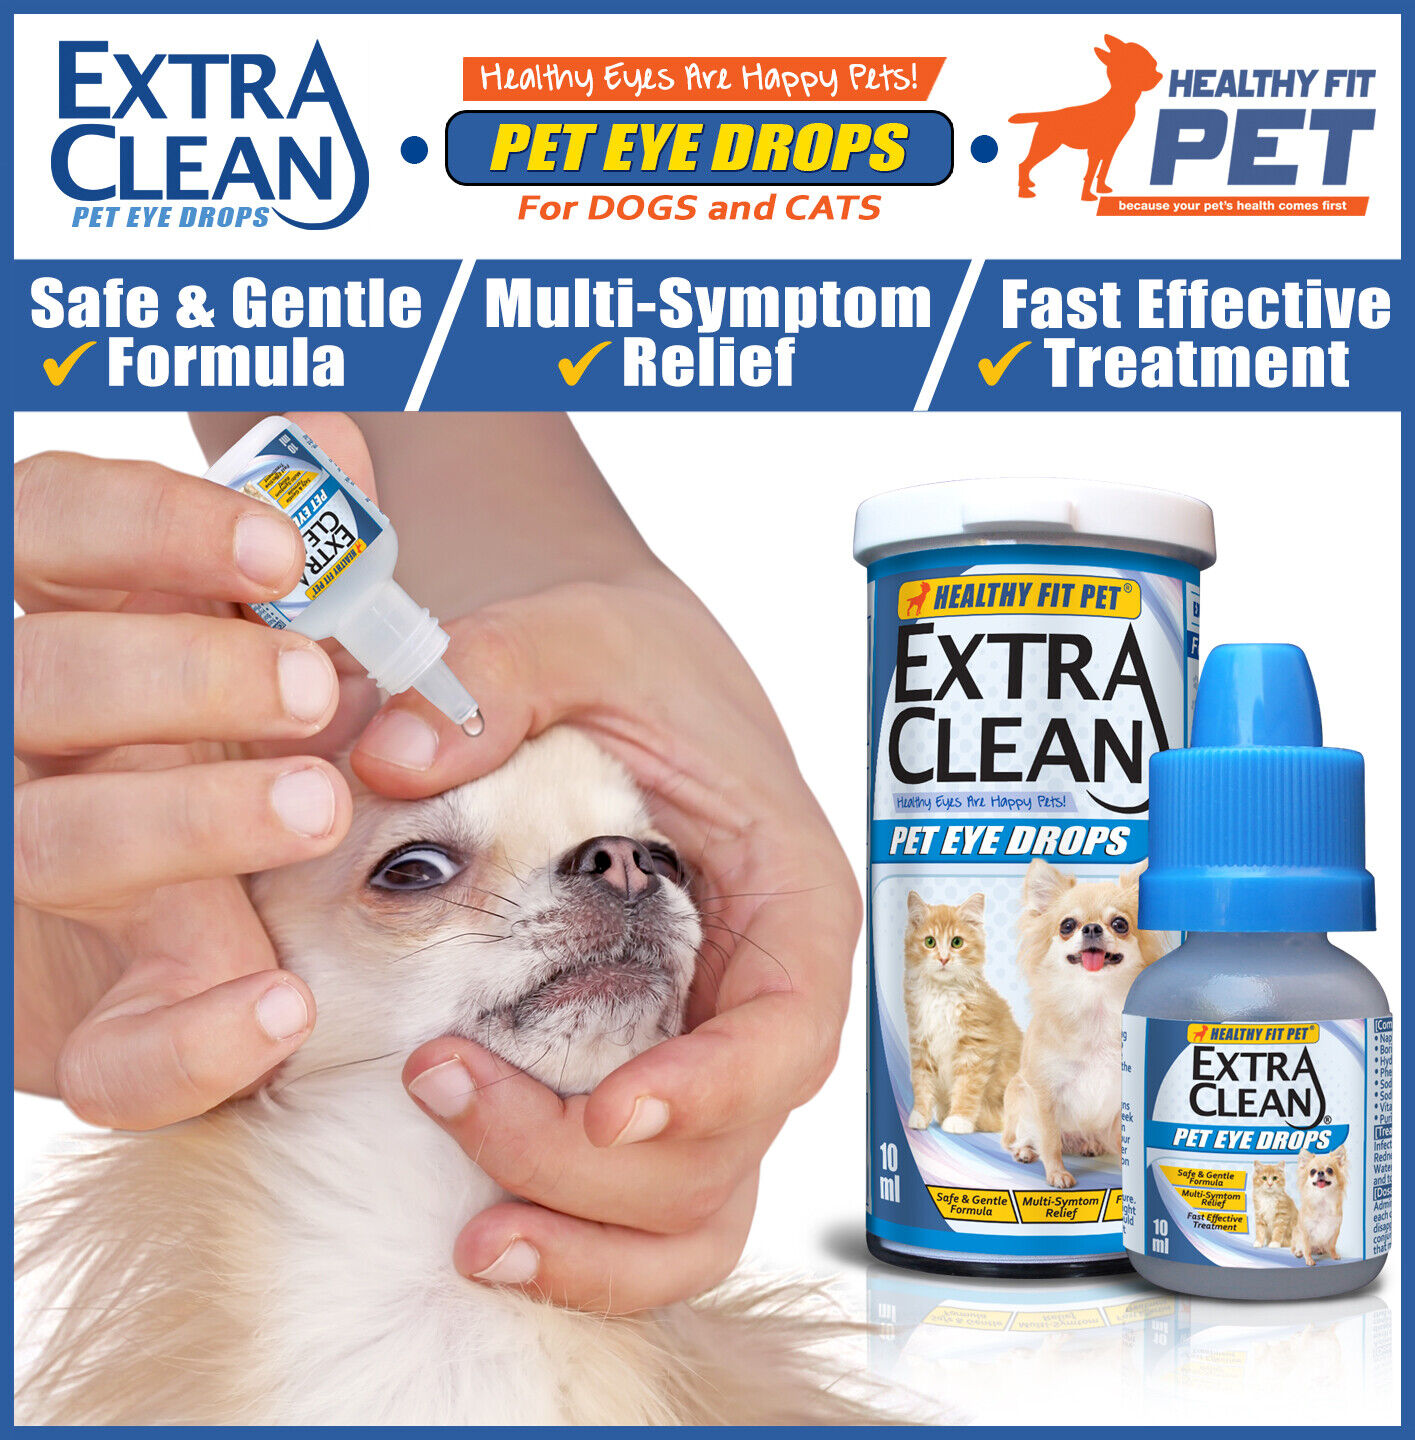 DOG CAT Infection Pink Eye Drops Red Irritation Inflammation Tears Itch Allergy